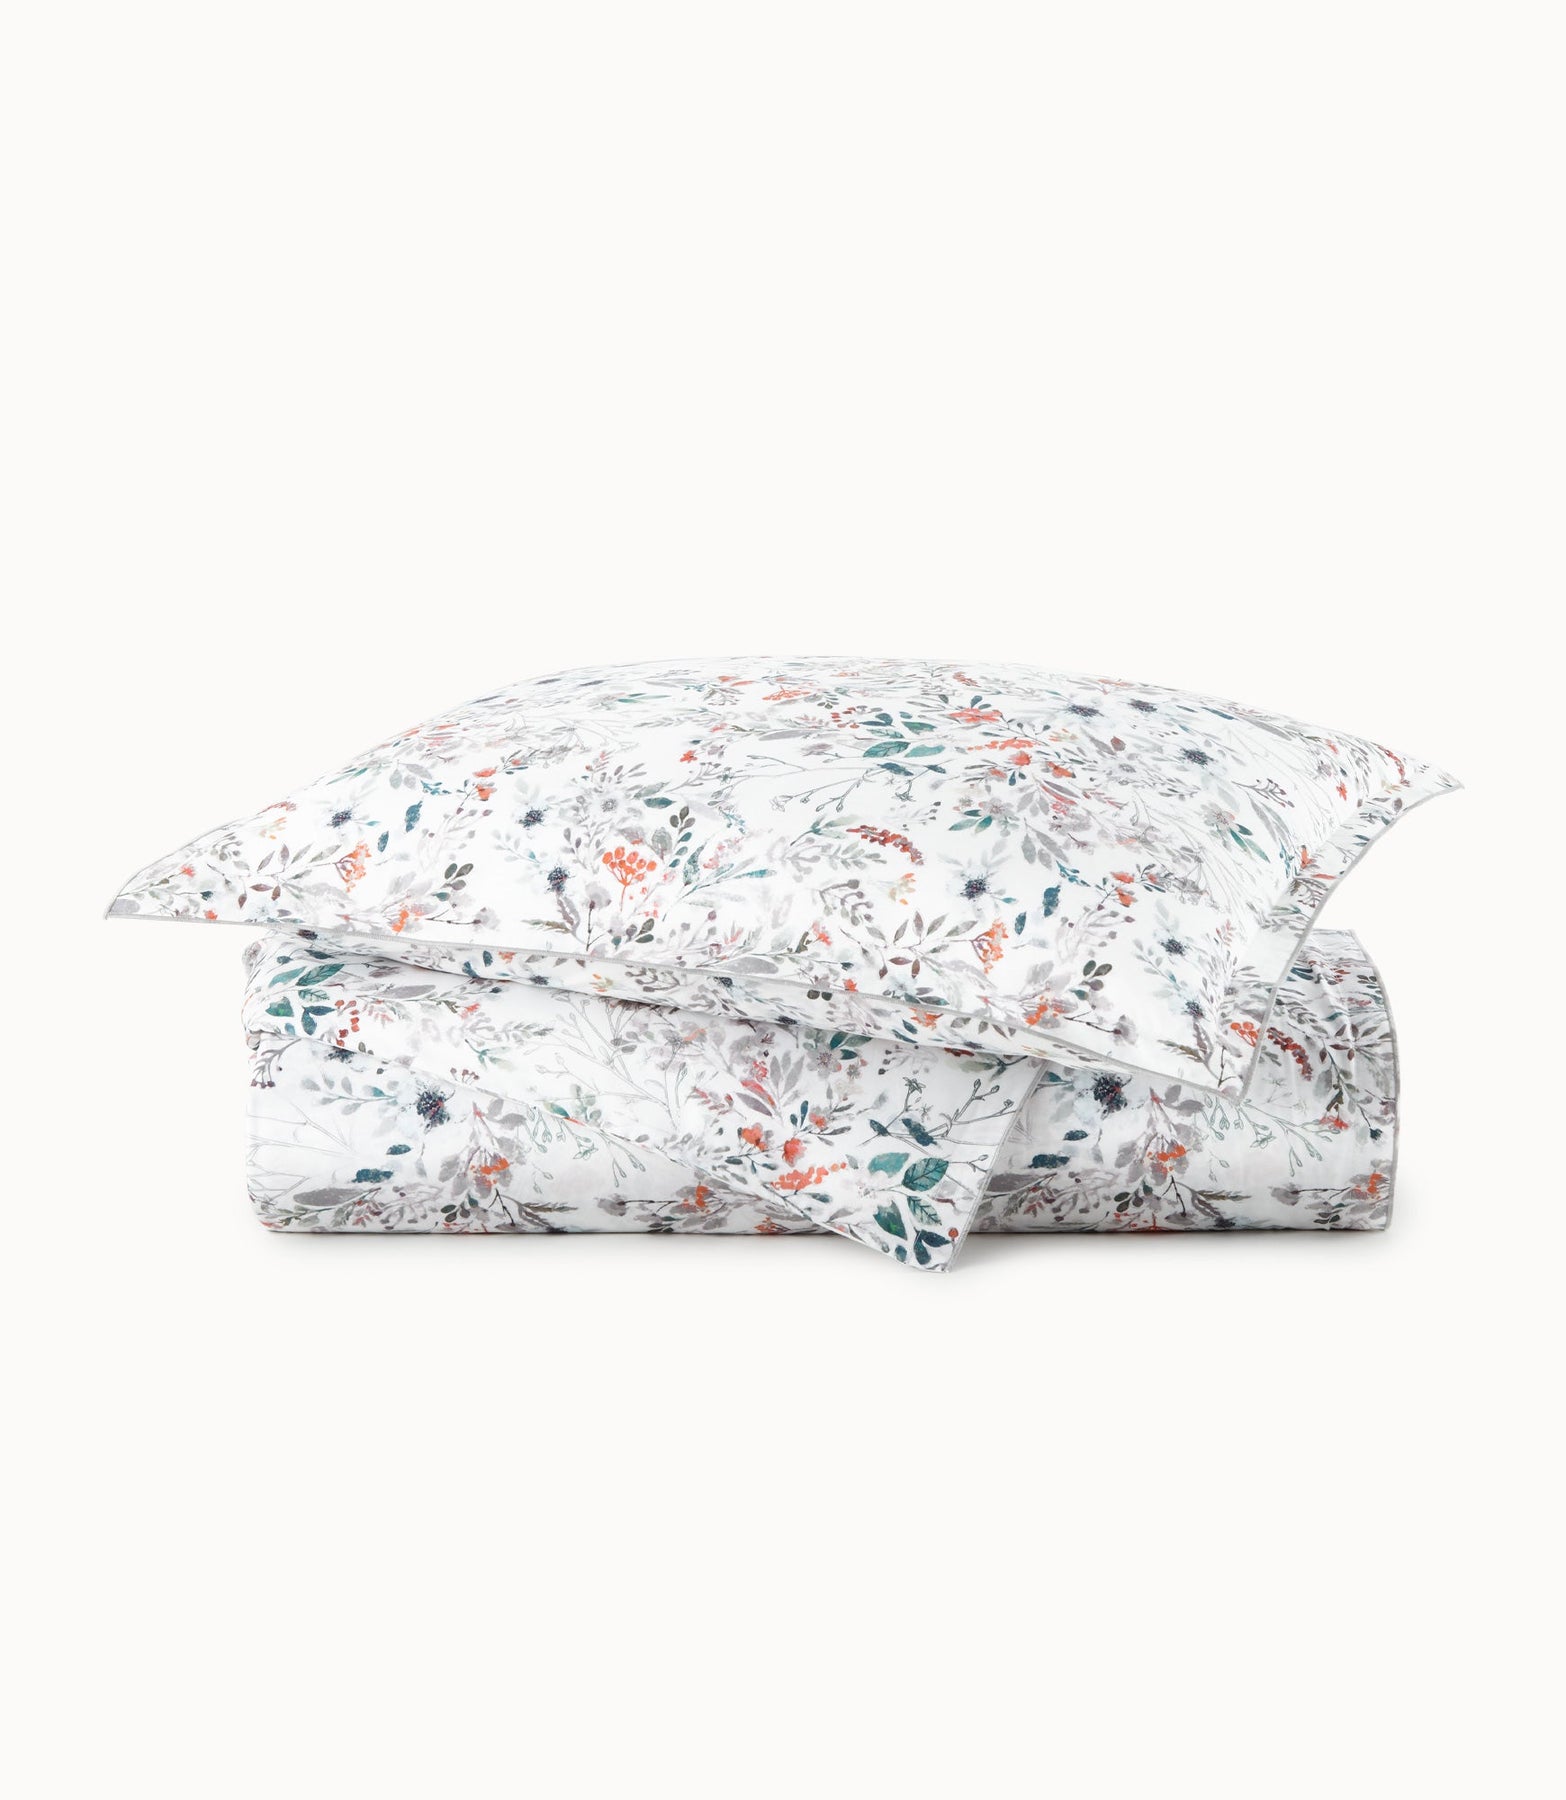 Fog Chloe Floral Percale Duvet Covers by Peacock Alley